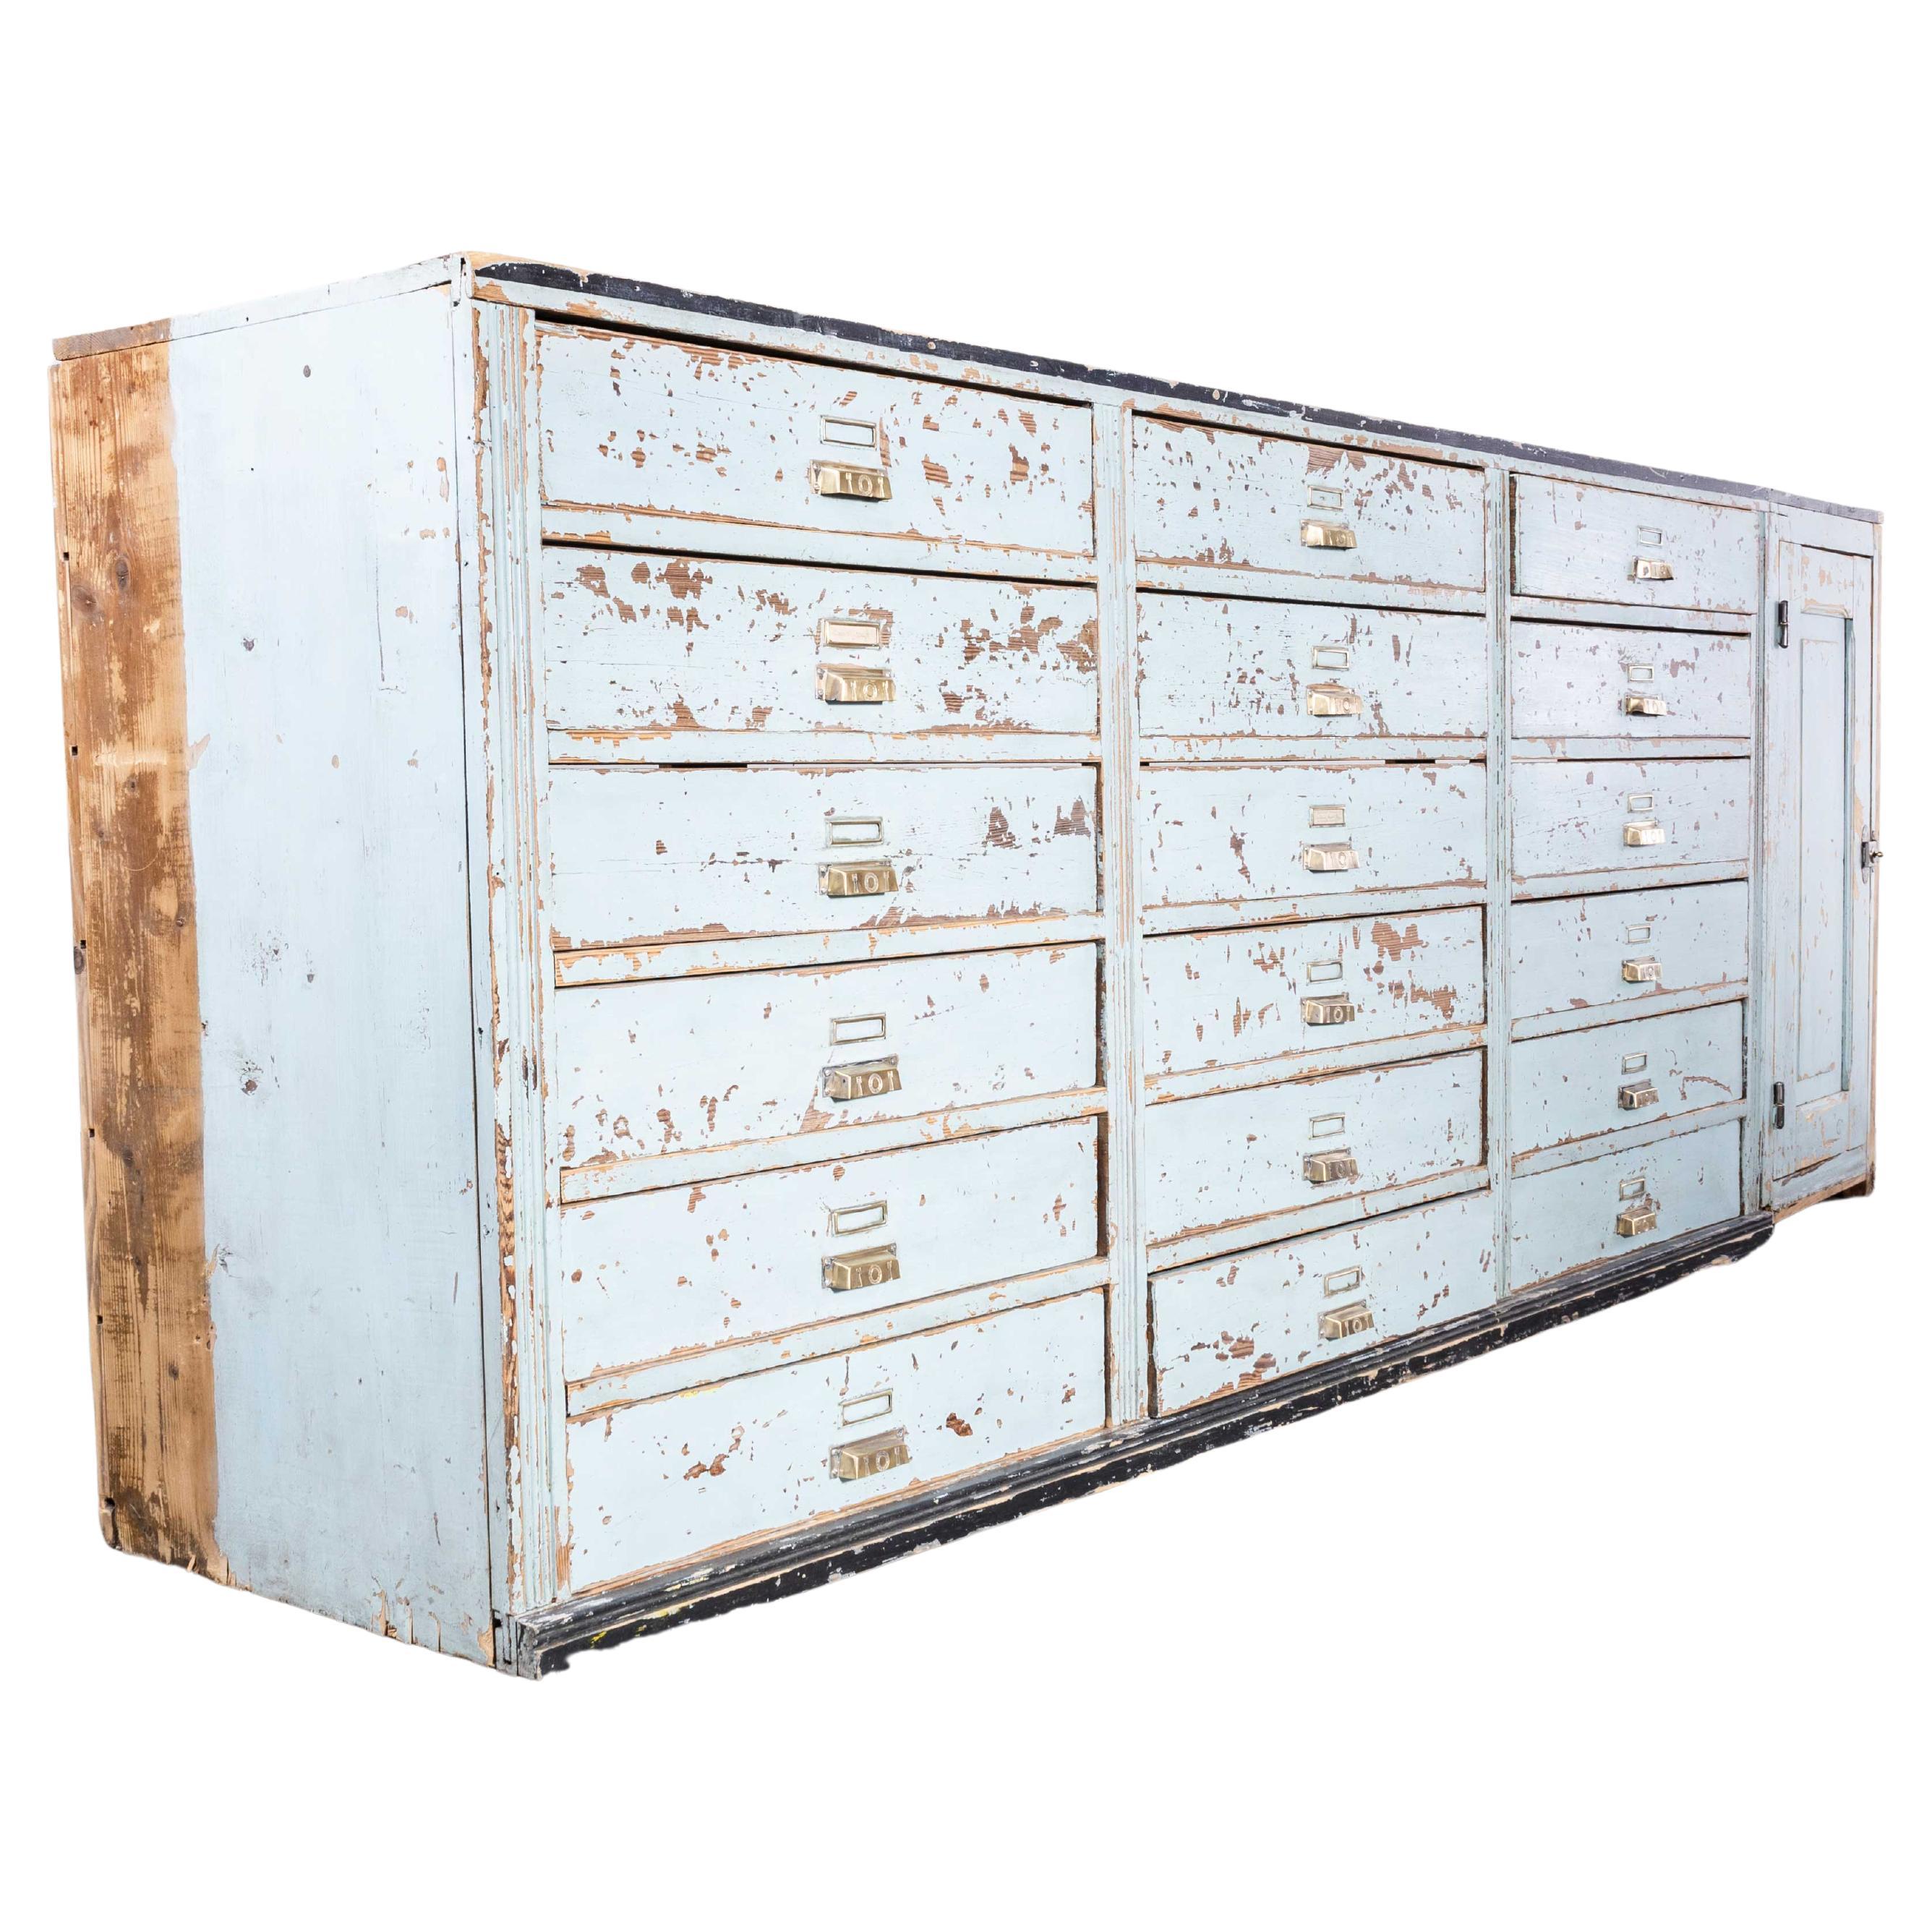 1940's Large Bank Of French Workshop Drawers - Eighteen Drawers